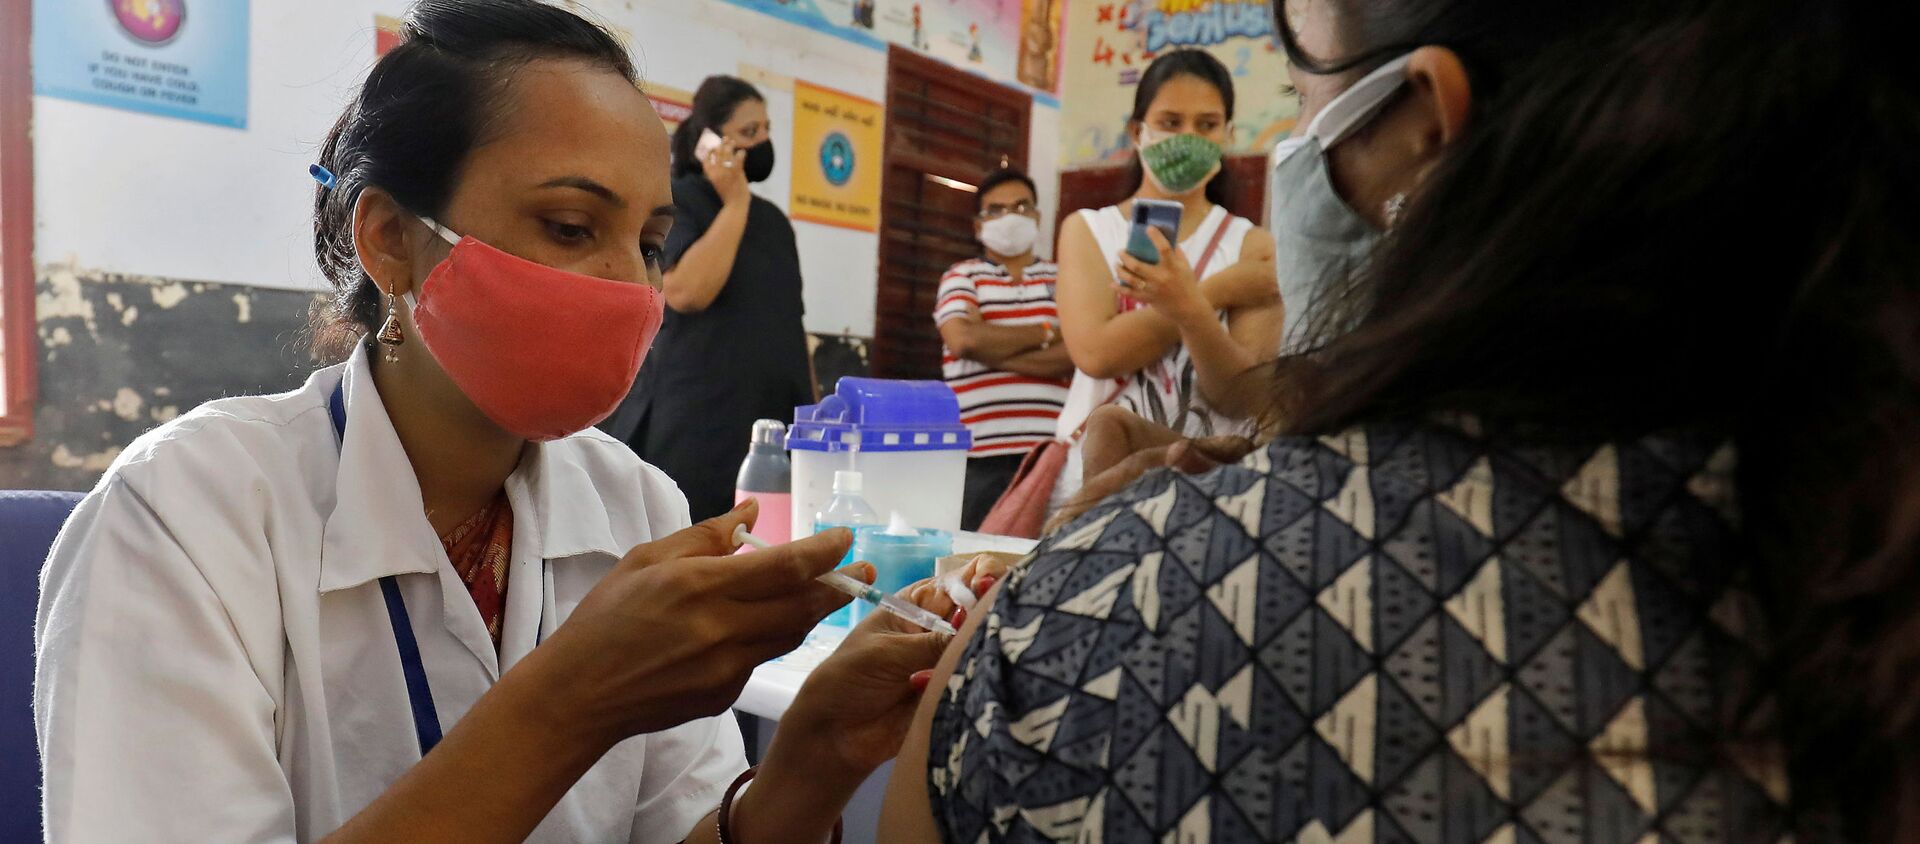 A healthcare worker gives a dose of COVISHIELD, a coronavirus disease (COVID-19) vaccine manufactured by Serum Institute of India, to a woman inside a classroom of a school, which has been converted into a temporary vaccination centre, in Ahmedabad, India, May 1, 2021 - Sputnik International, 1920